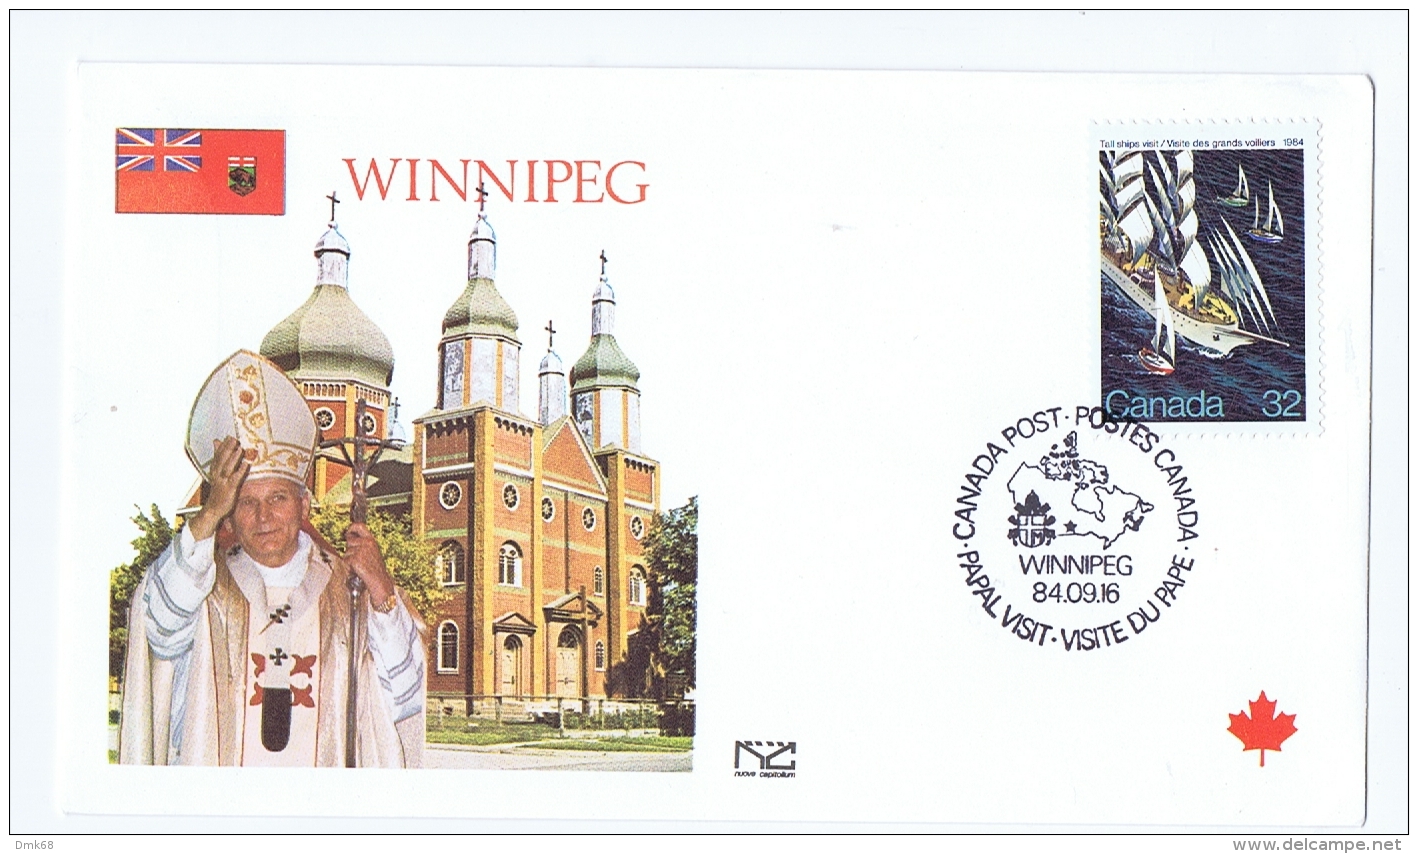 CANADA - WINNIPEG - POPE JOHN PAUL?VISIT - FIRST DAY OF ISSUE - 1984 - 1981-1990